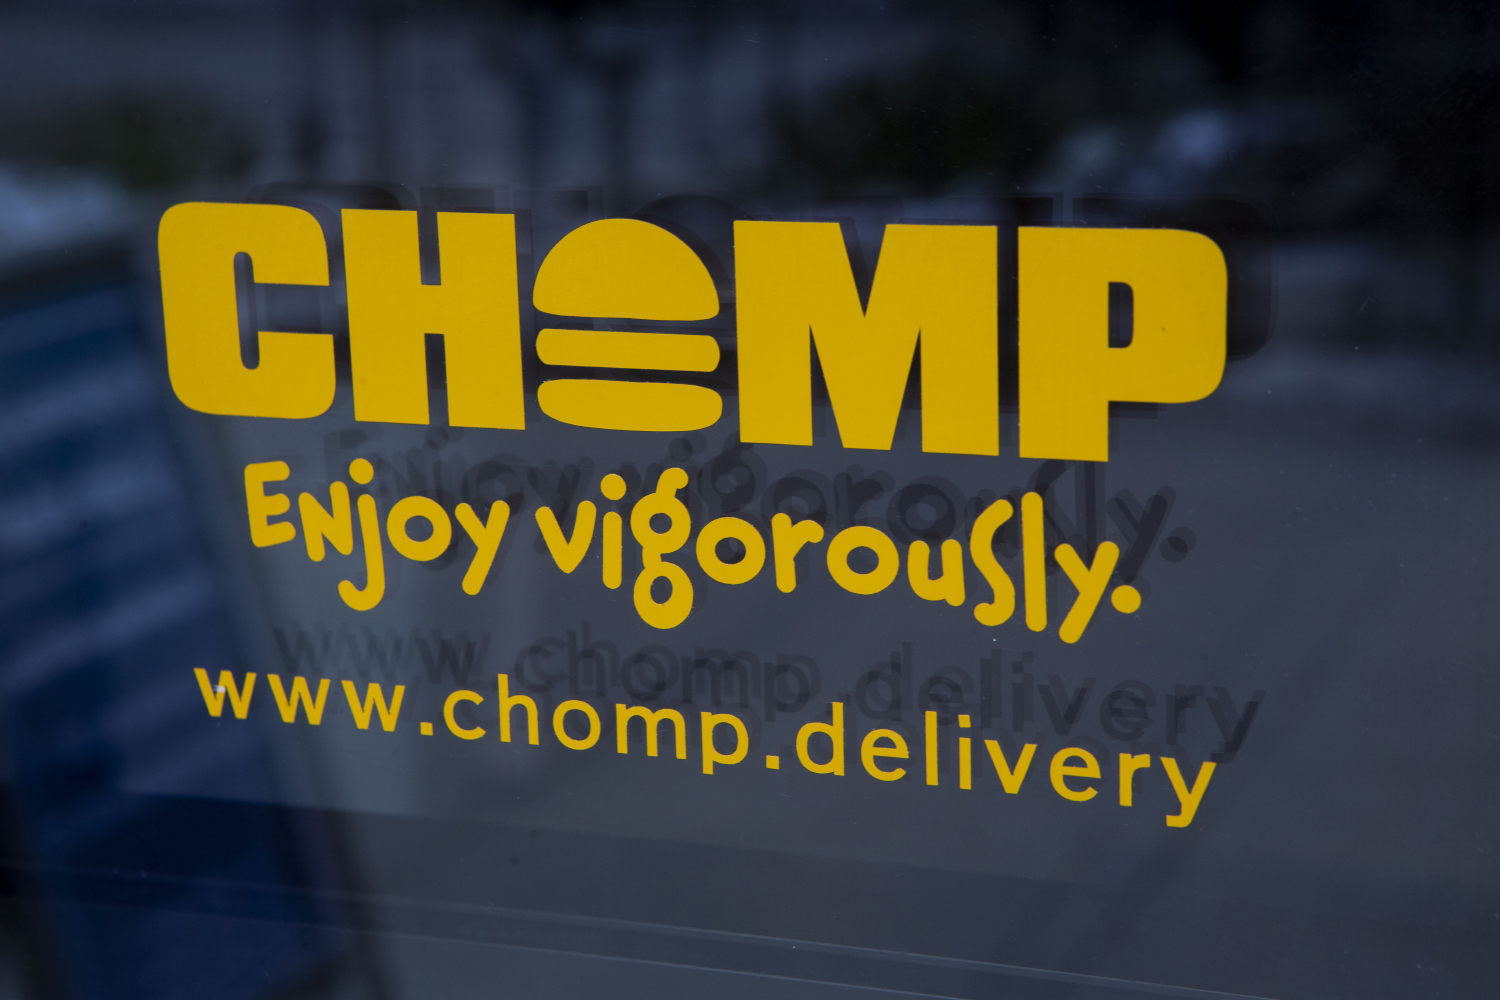 Local food delivery service CHOMP honored for 'impact and innovation